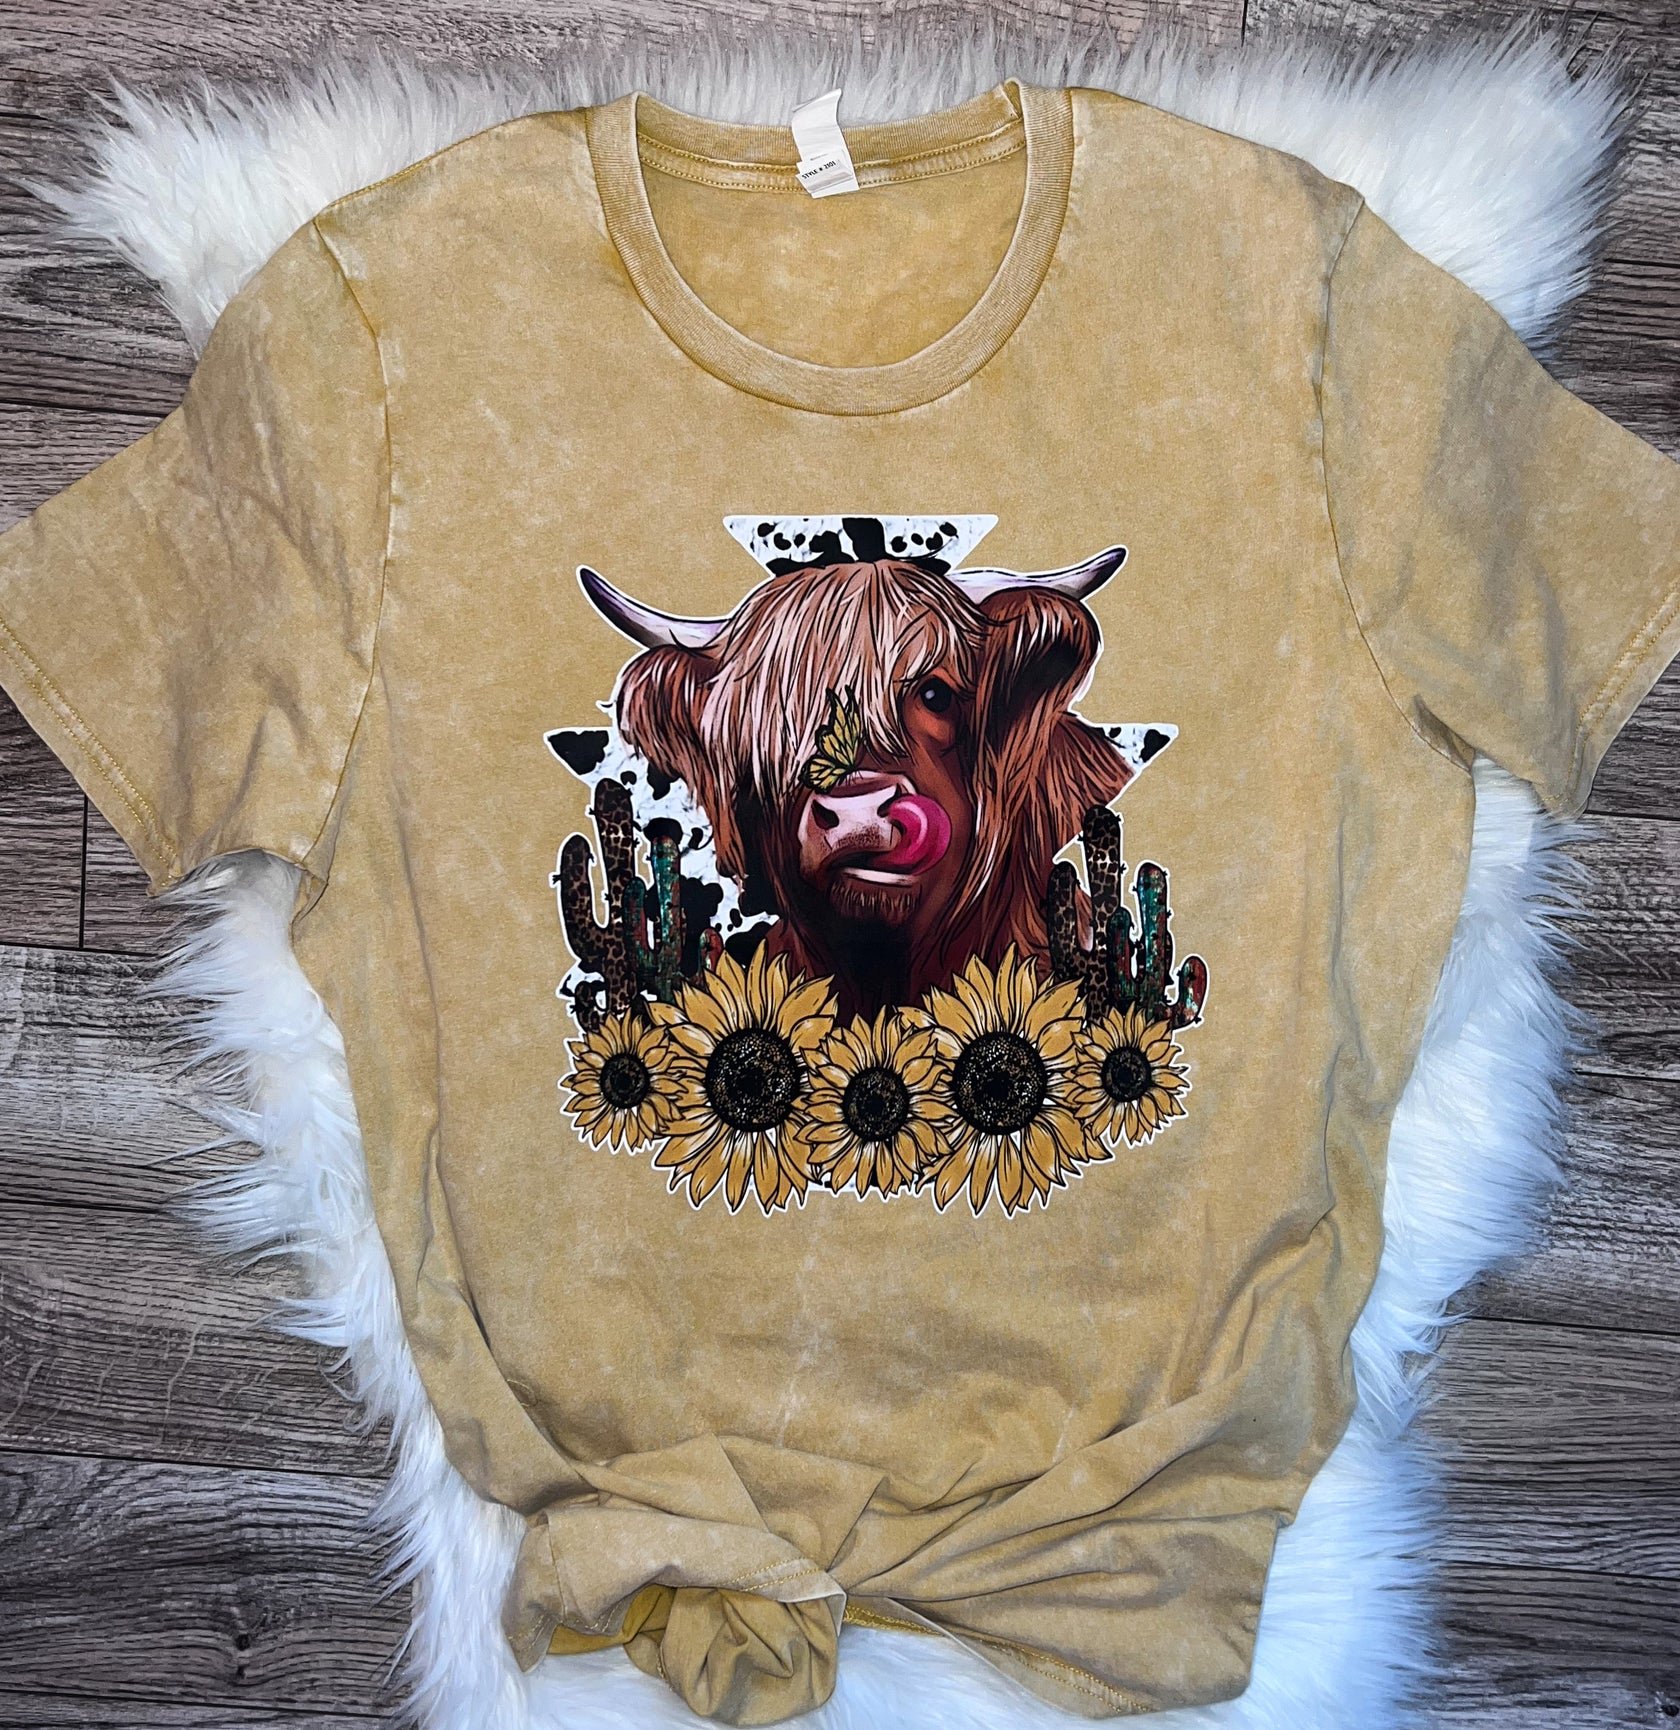 Super Soft Acid Wash Tee With Highland Cow & Sunflowers – Denim and ...